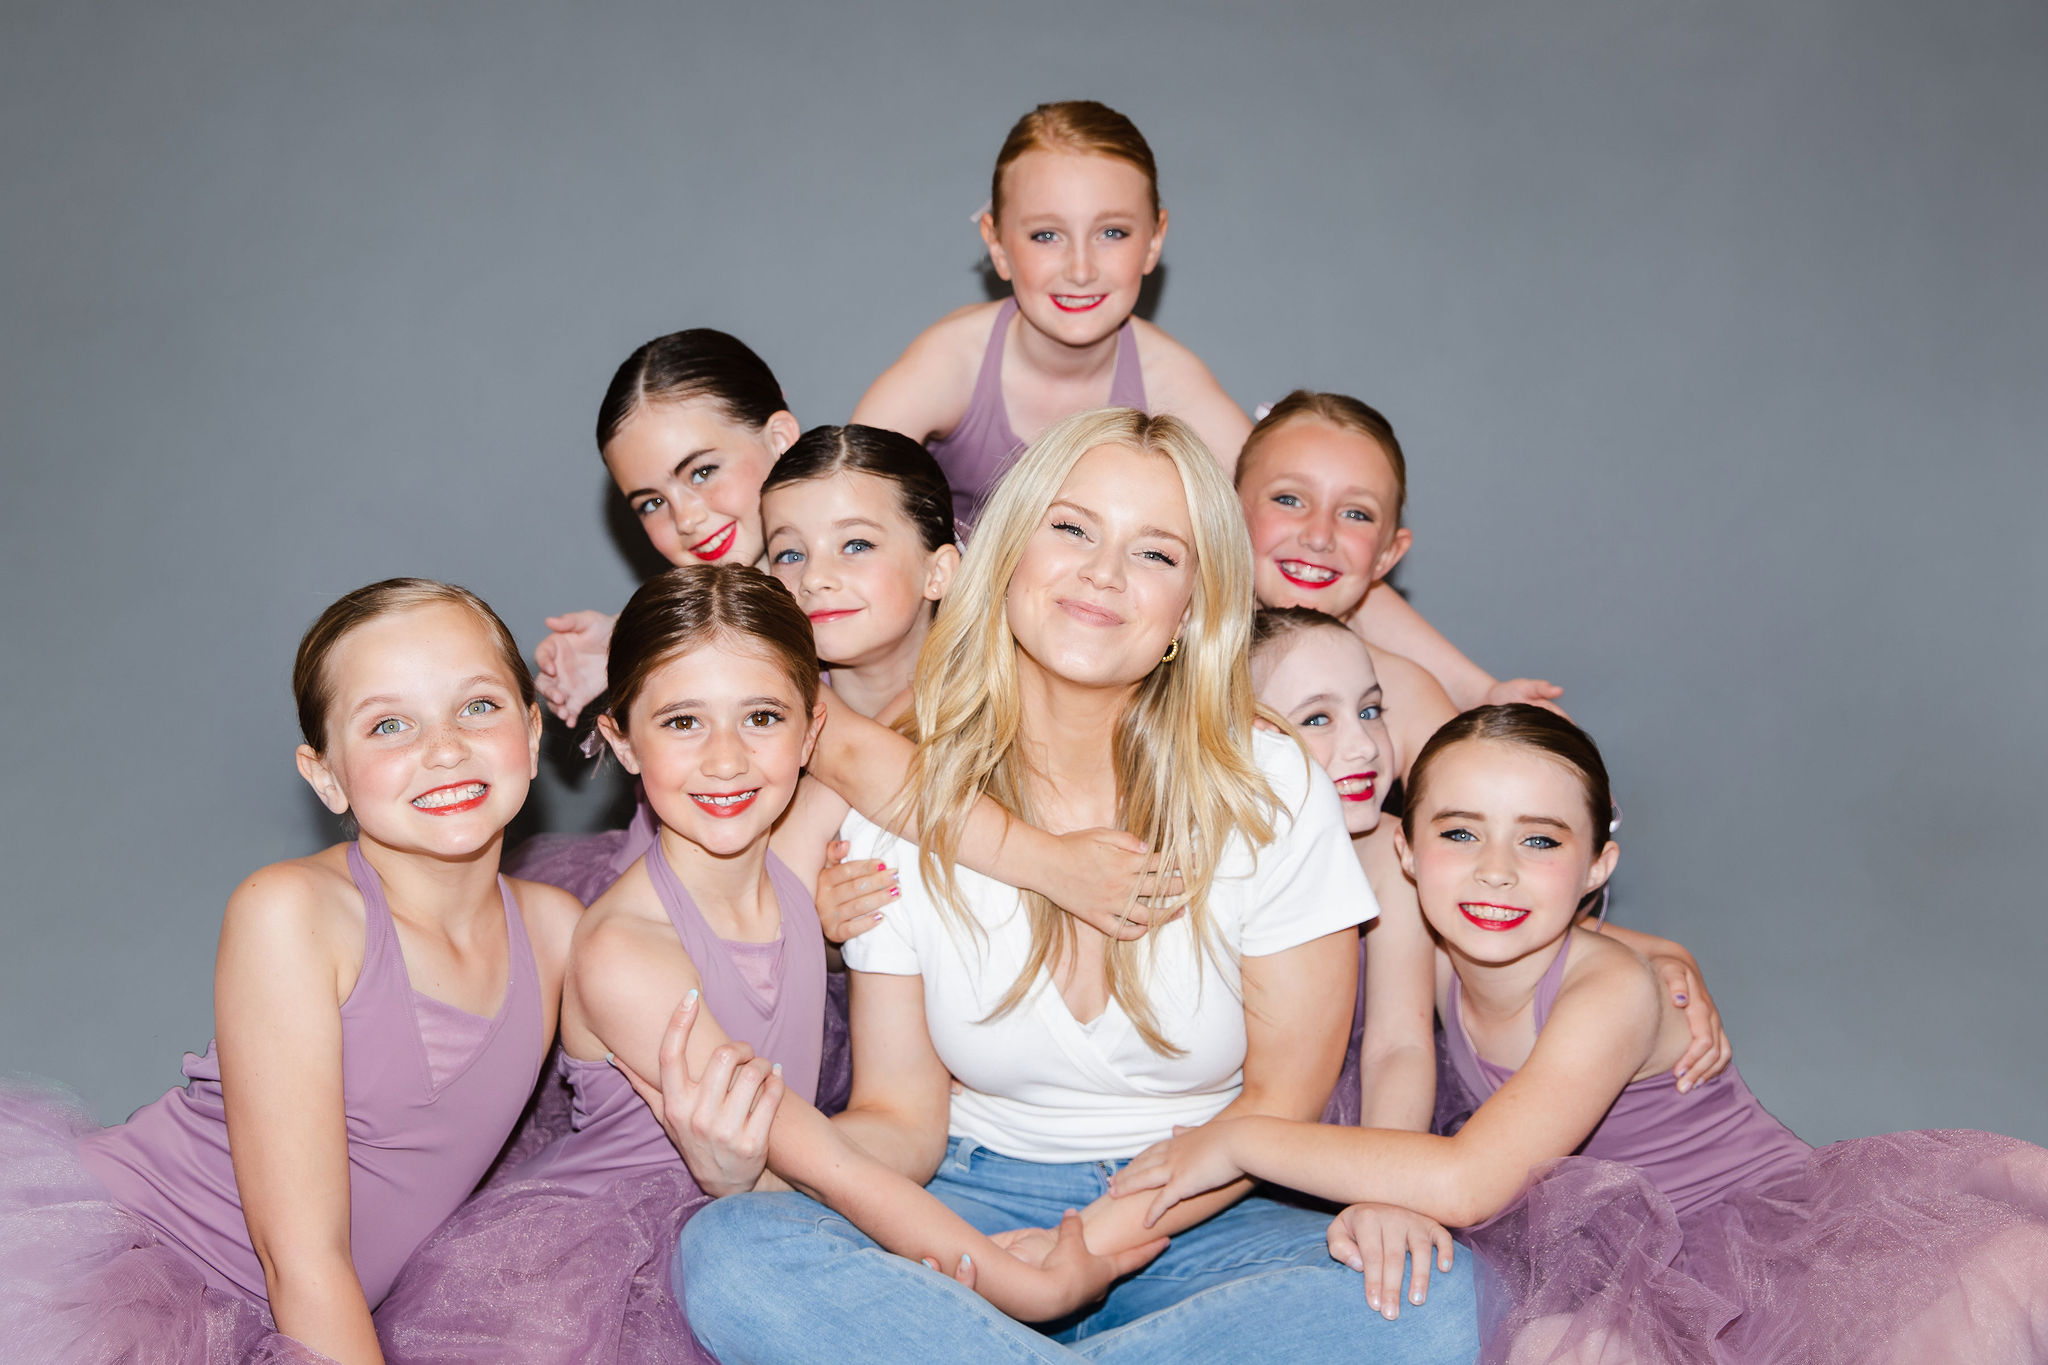 HALEY HILTON is a young fair-skinned blonde woman in a white t-shirt and jeans. She sits cross-legged, surrounded by 8 girls in lavender-colored leotards and skirts.